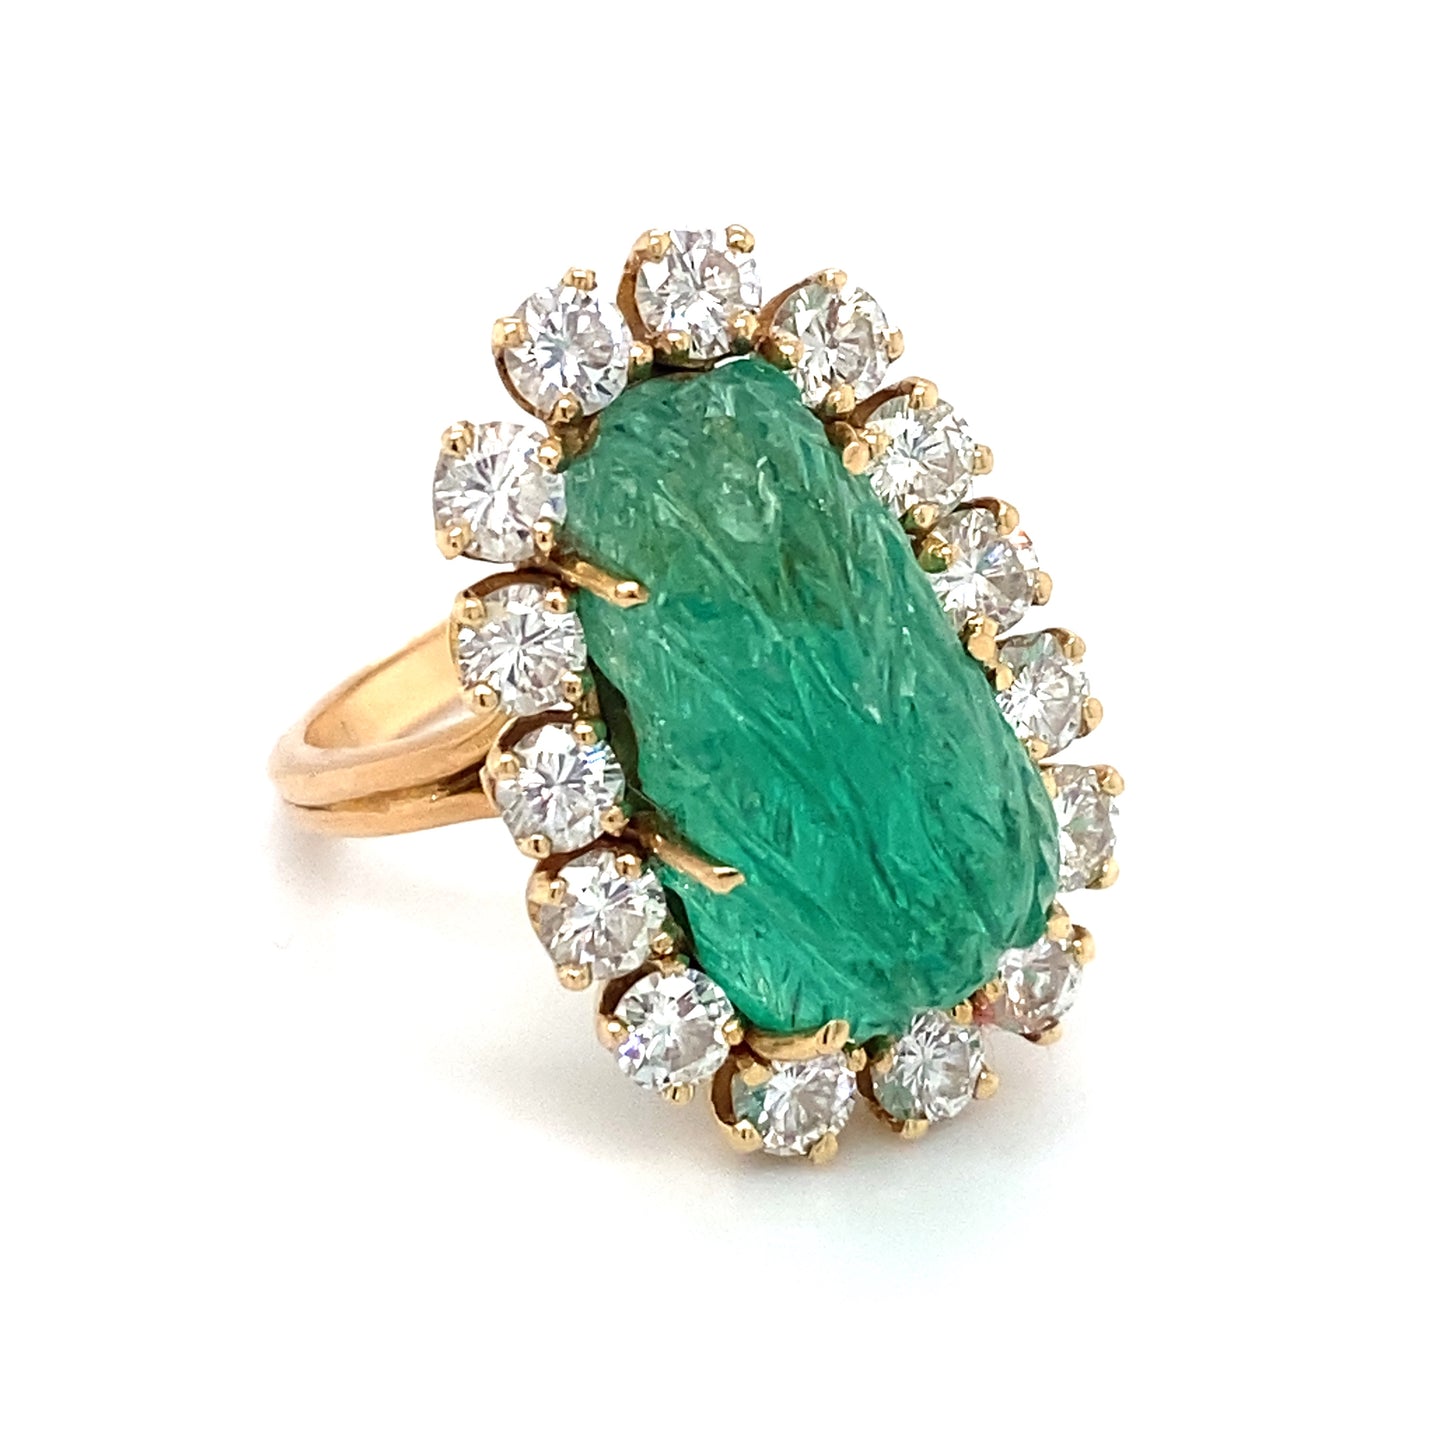 Circa 1960s Carved Emerald and Diamond Ring in 14K Gold